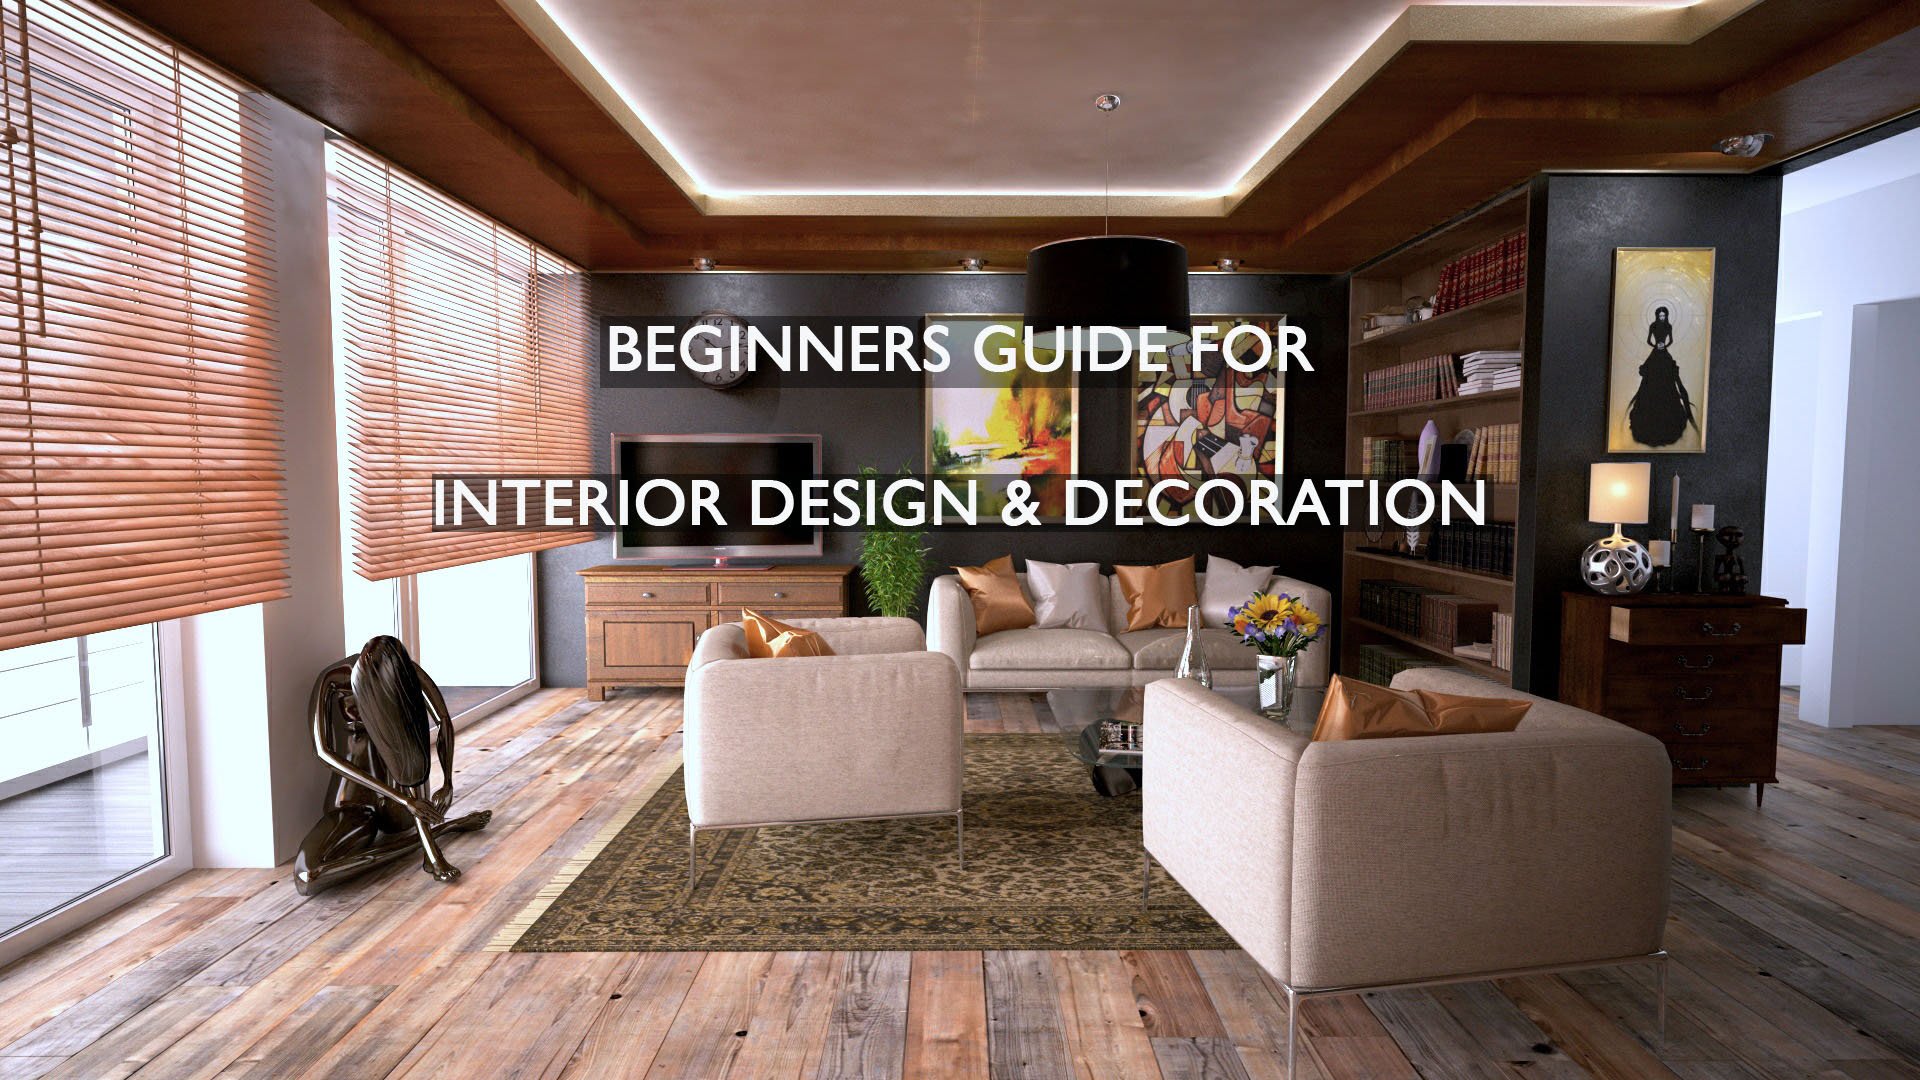 Discover… Top Home Design Ideas And Decorating Trends